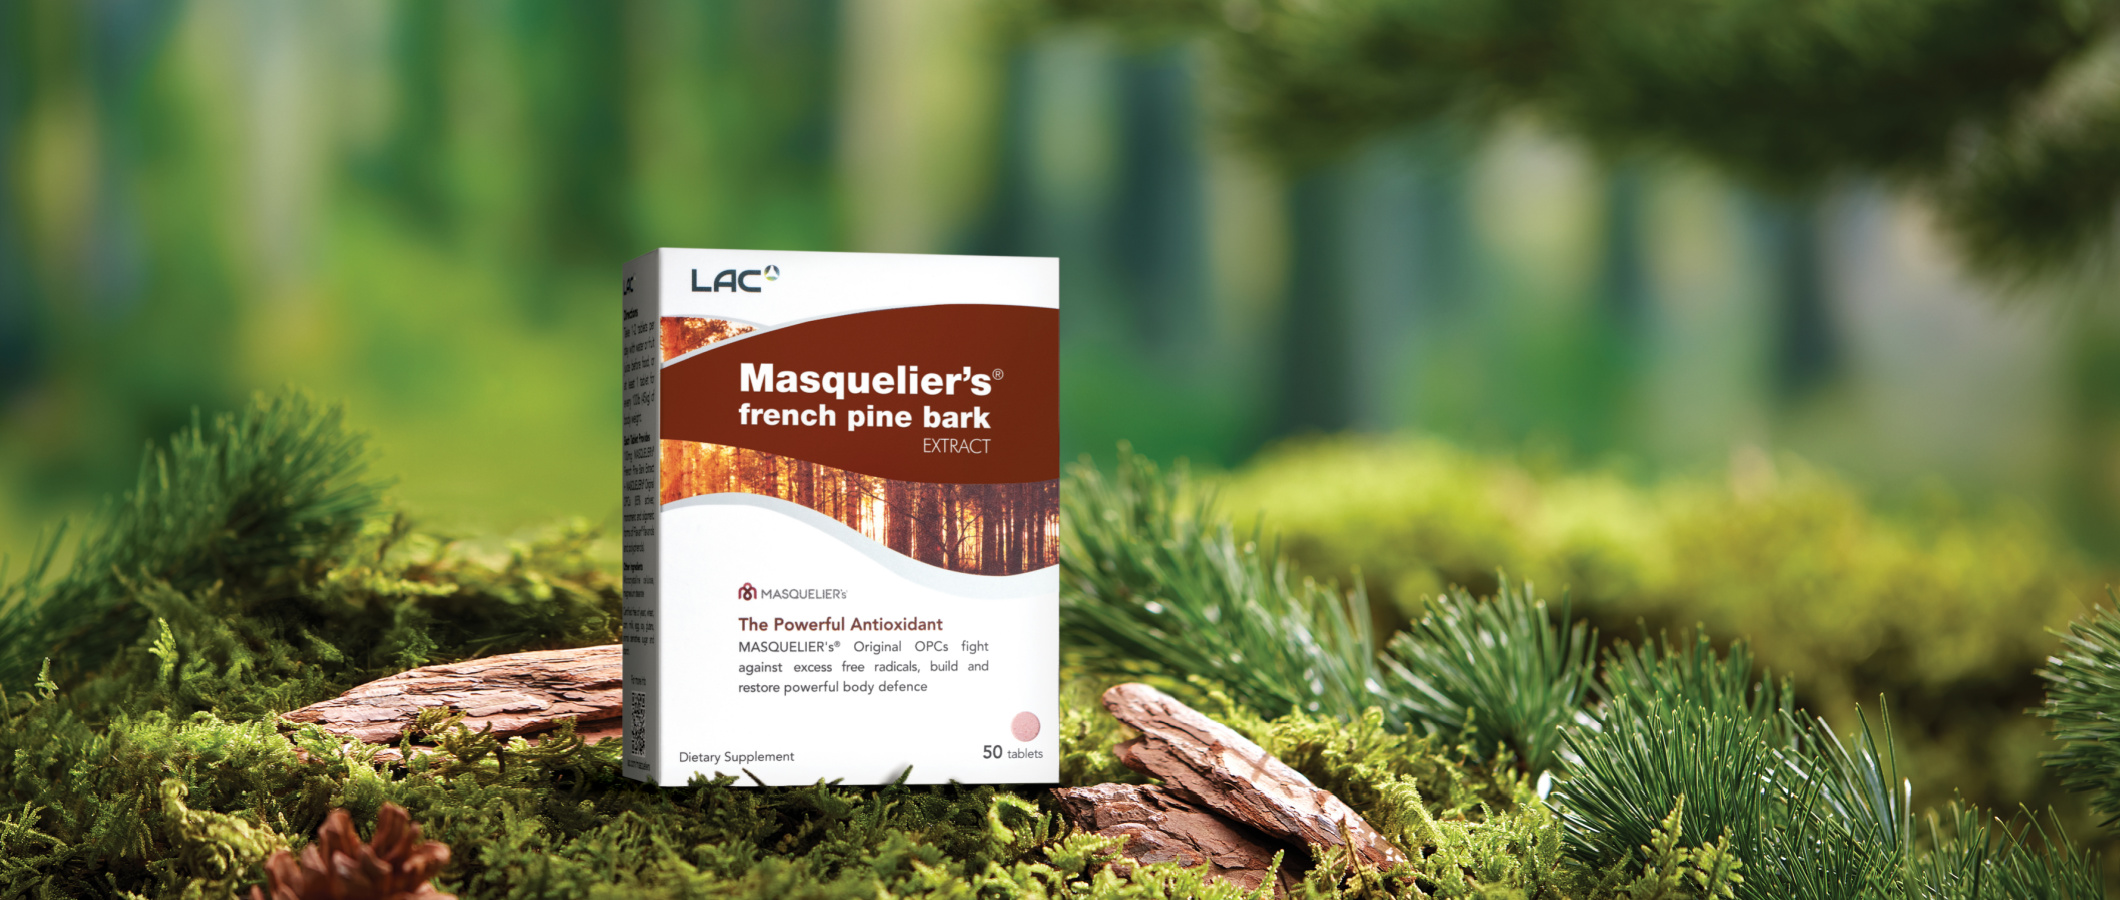 LAC MASQUELIER’S® 
French Pine Bark Extrac